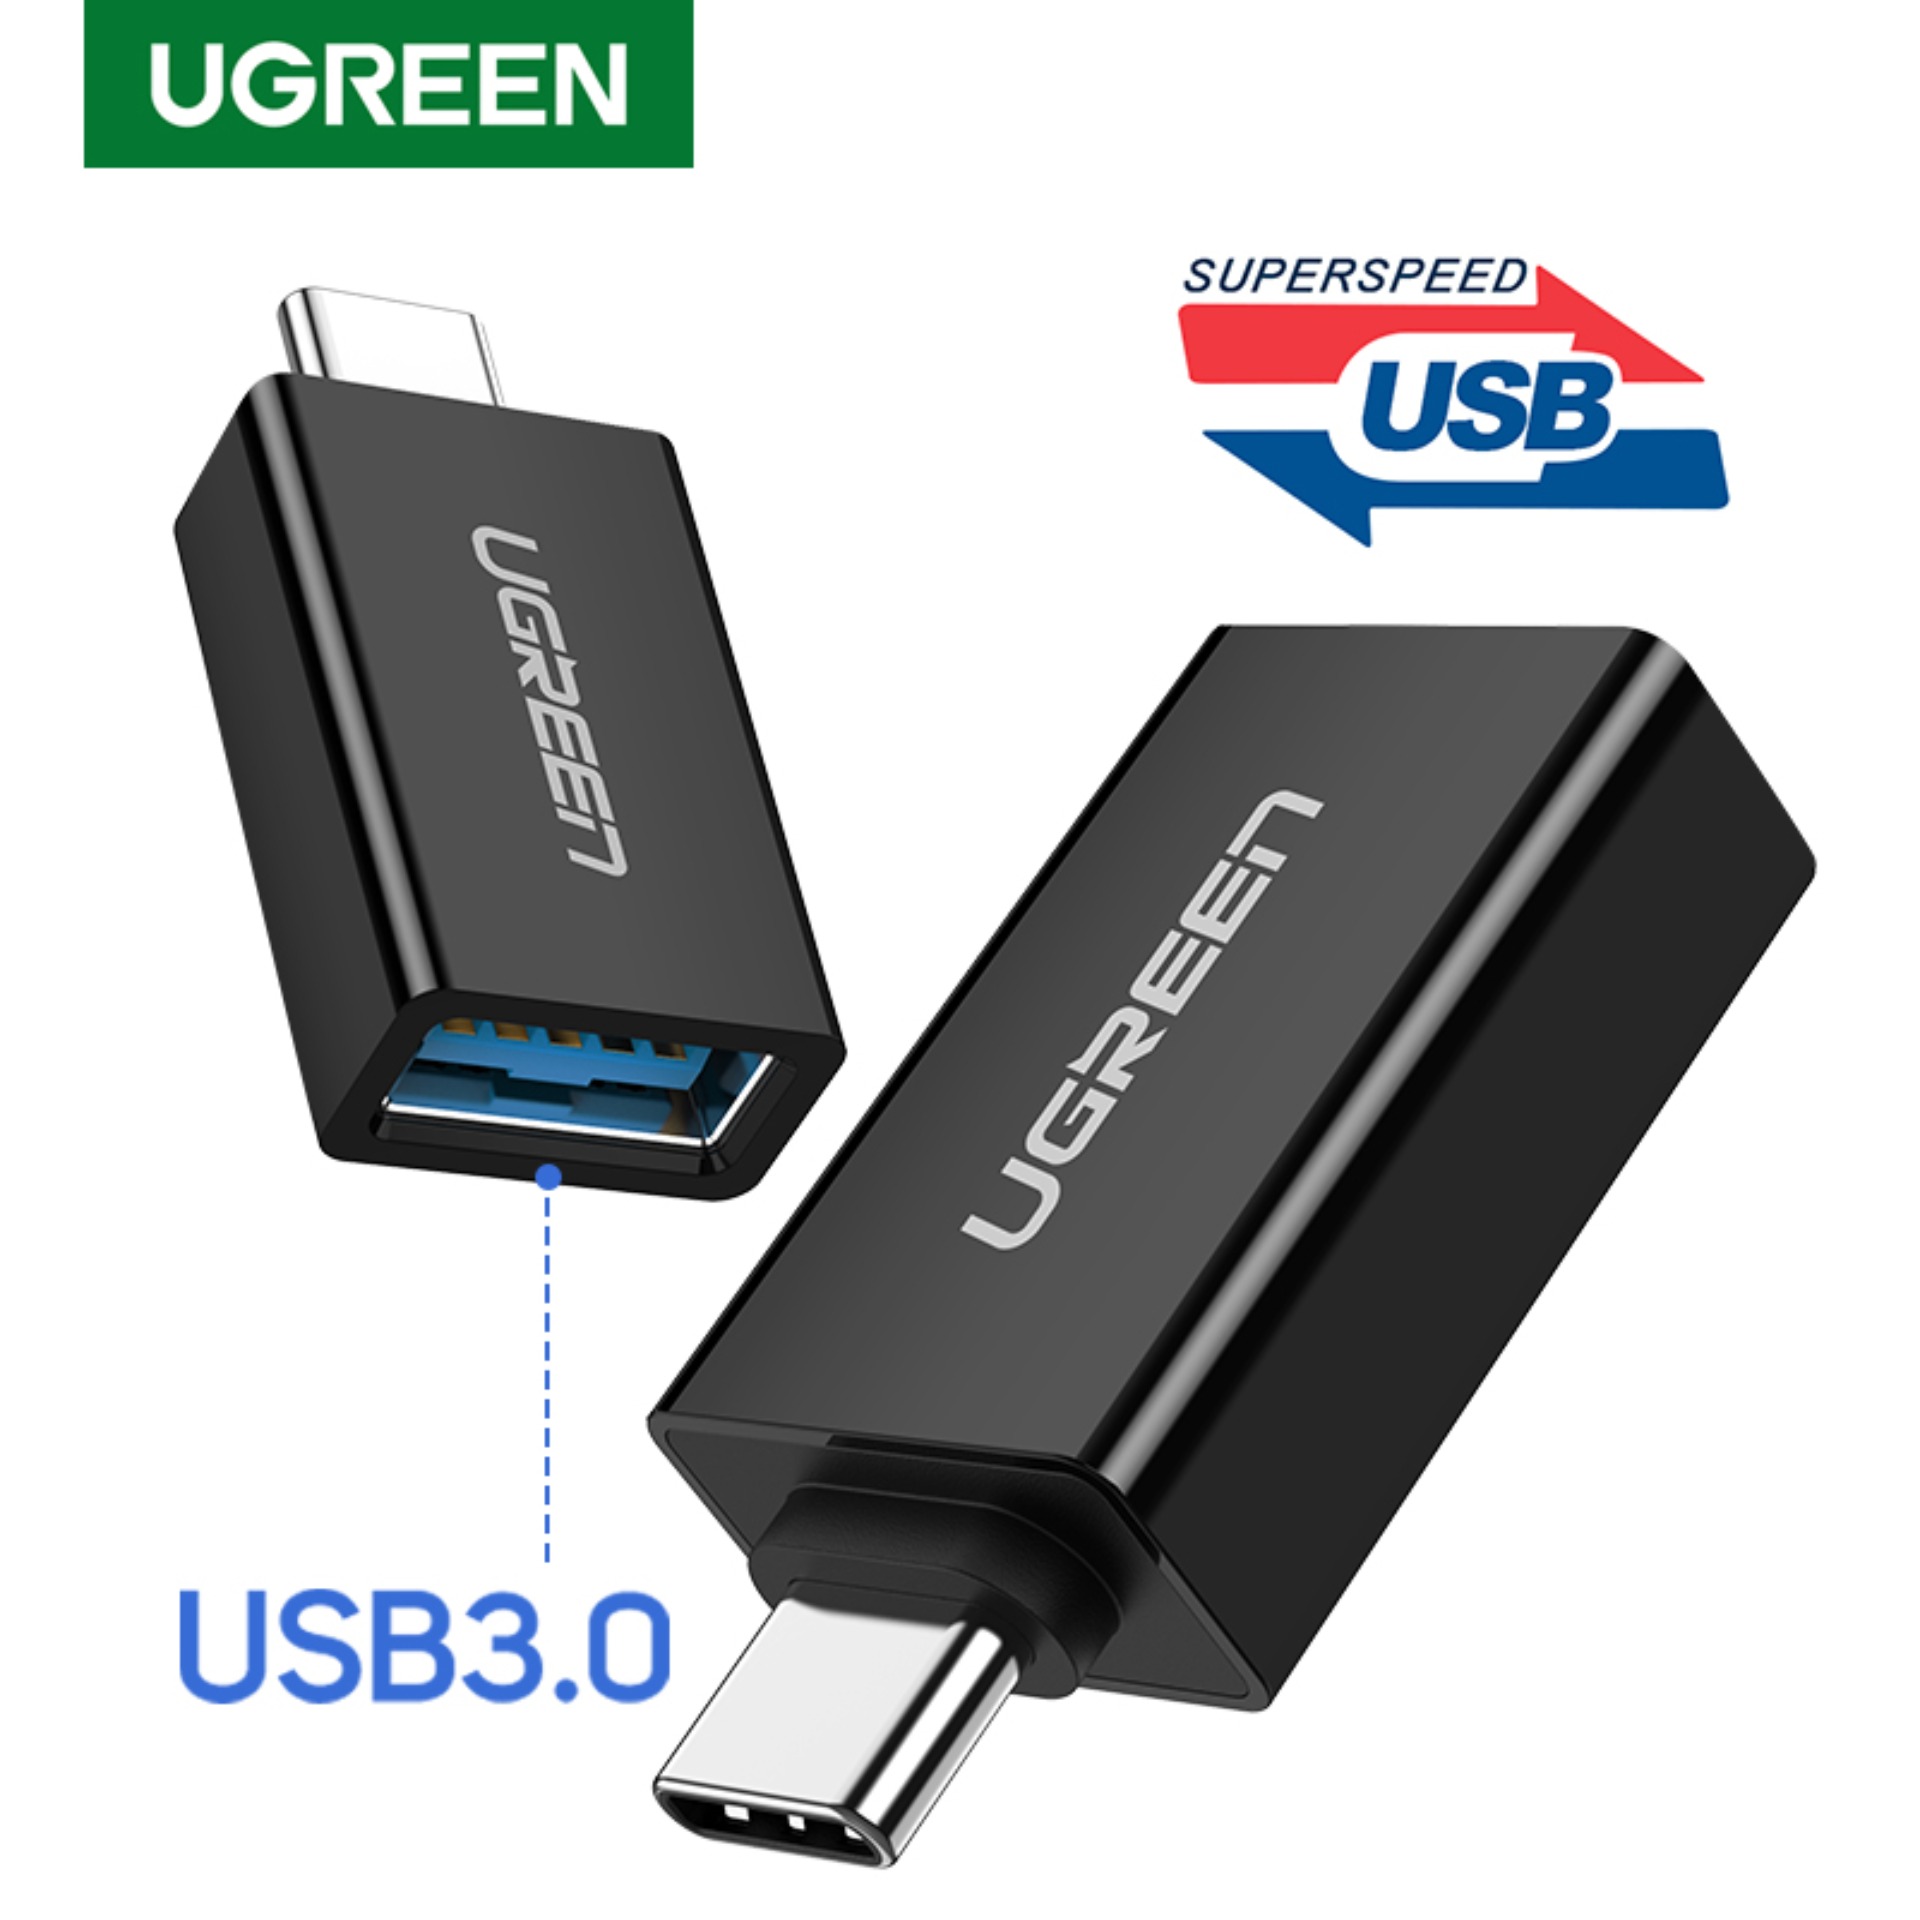 UGREEN Type C Adapter Type-C to USB 3.0 OTG Cable Adapter USB C Converter for Redmi note 7, SAMSUNG S10+, Huawei Mate 10, P20, One plus 6 5 Xiaomi mi 8 Huawei USB C OTG Adapter